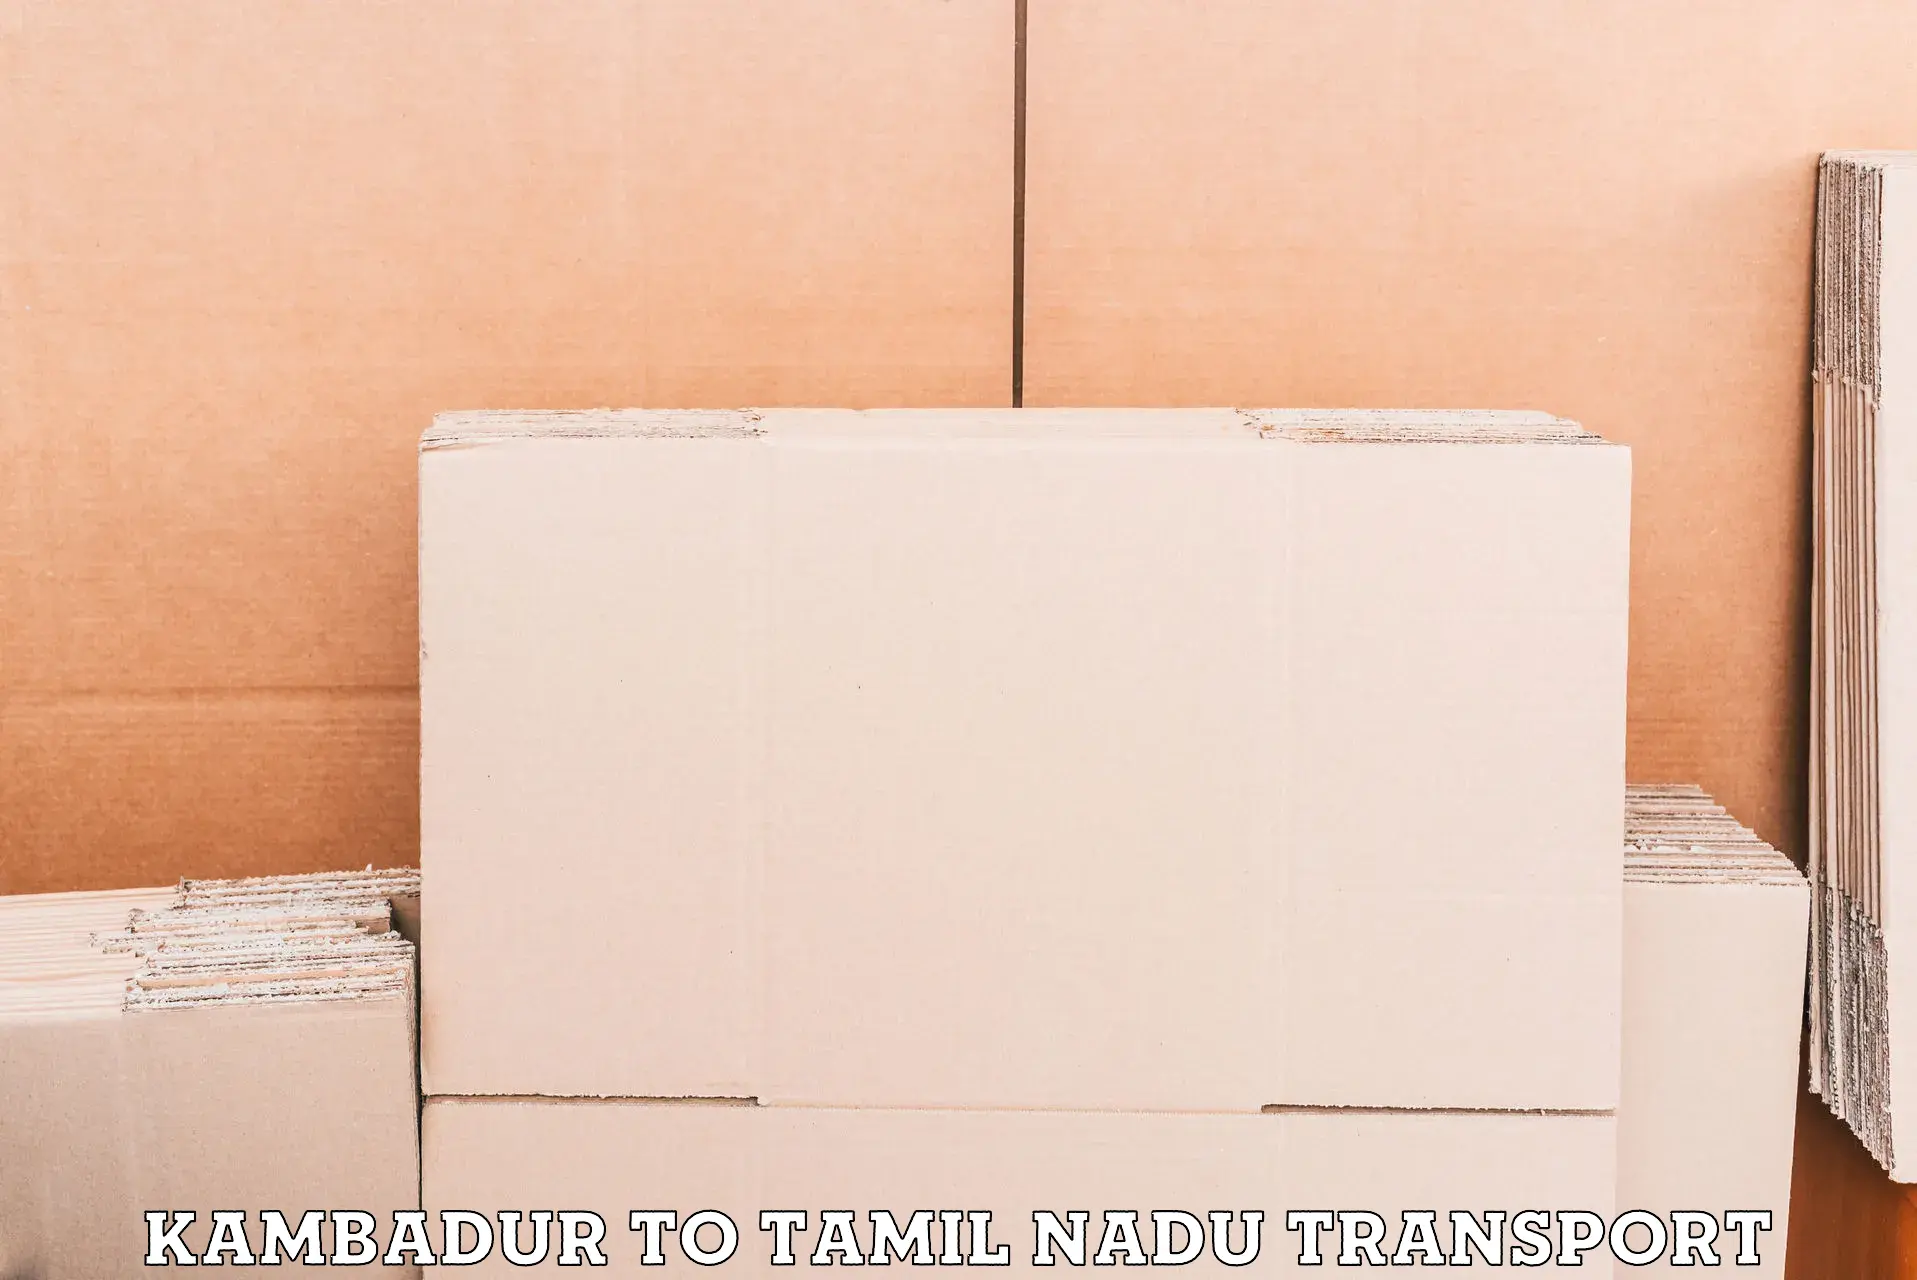 Express transport services Kambadur to SRM Institute of Science and Technology Chennai